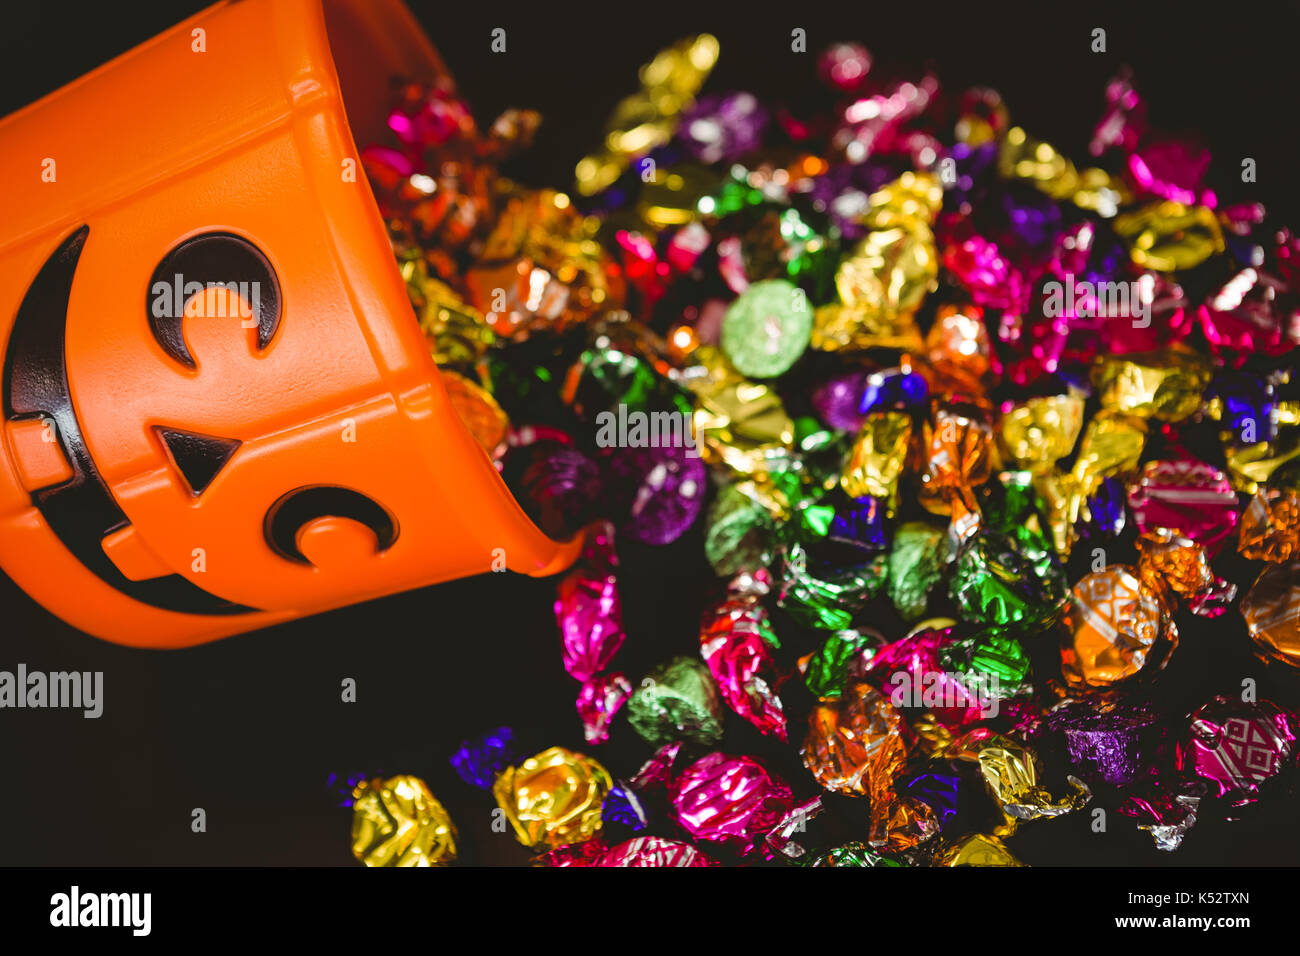 High angle view of bucket with colorful chocolates during Halloween over black background Stock Photo